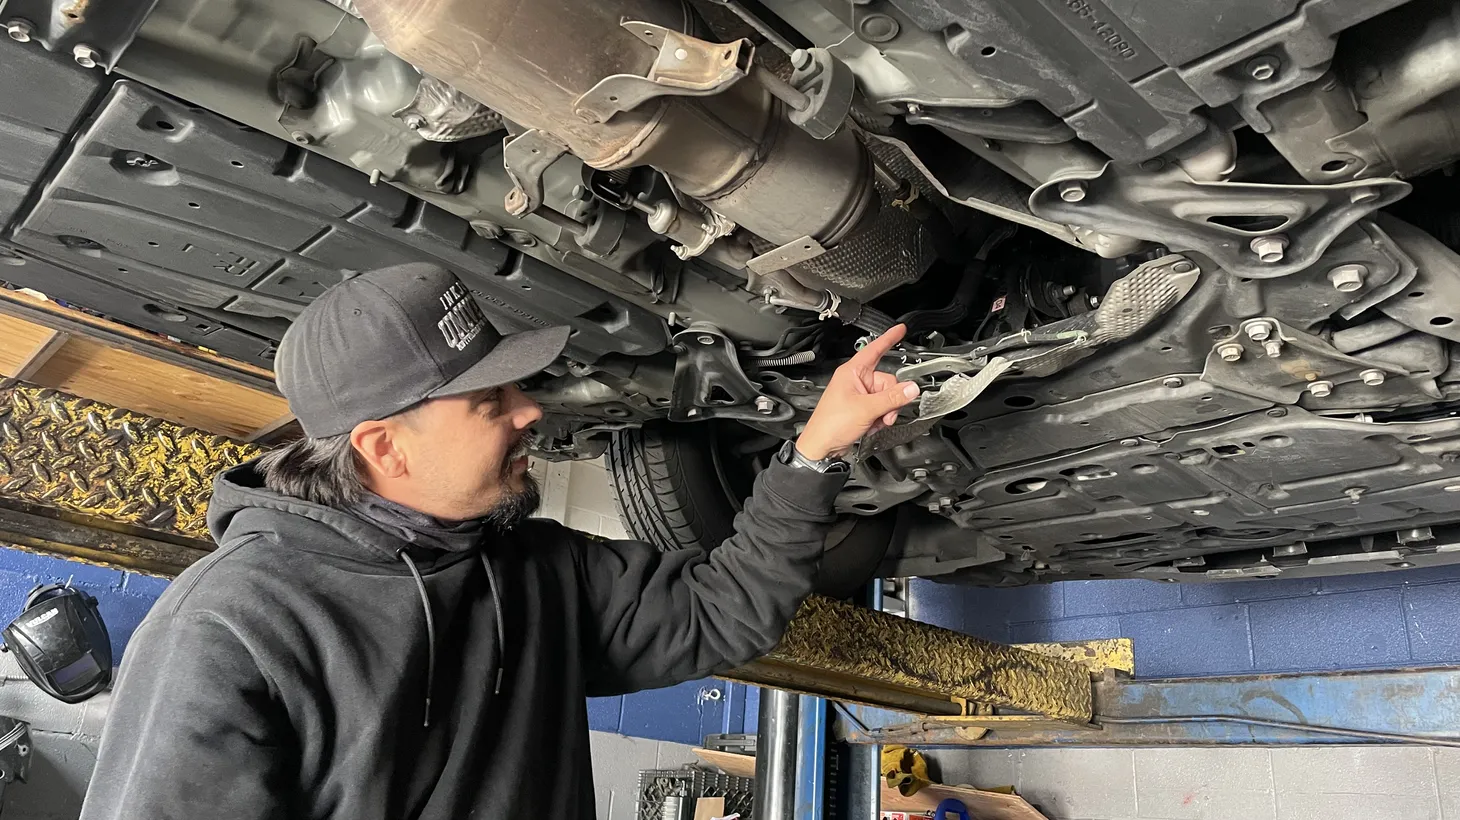 Edward Luna points to the spot where a catalytic converter was cut from a customer’s 2011 Toyota Prius. The Van Nuys shop he runs with his father has seen a constant flow of customers with stolen catalytic converters.